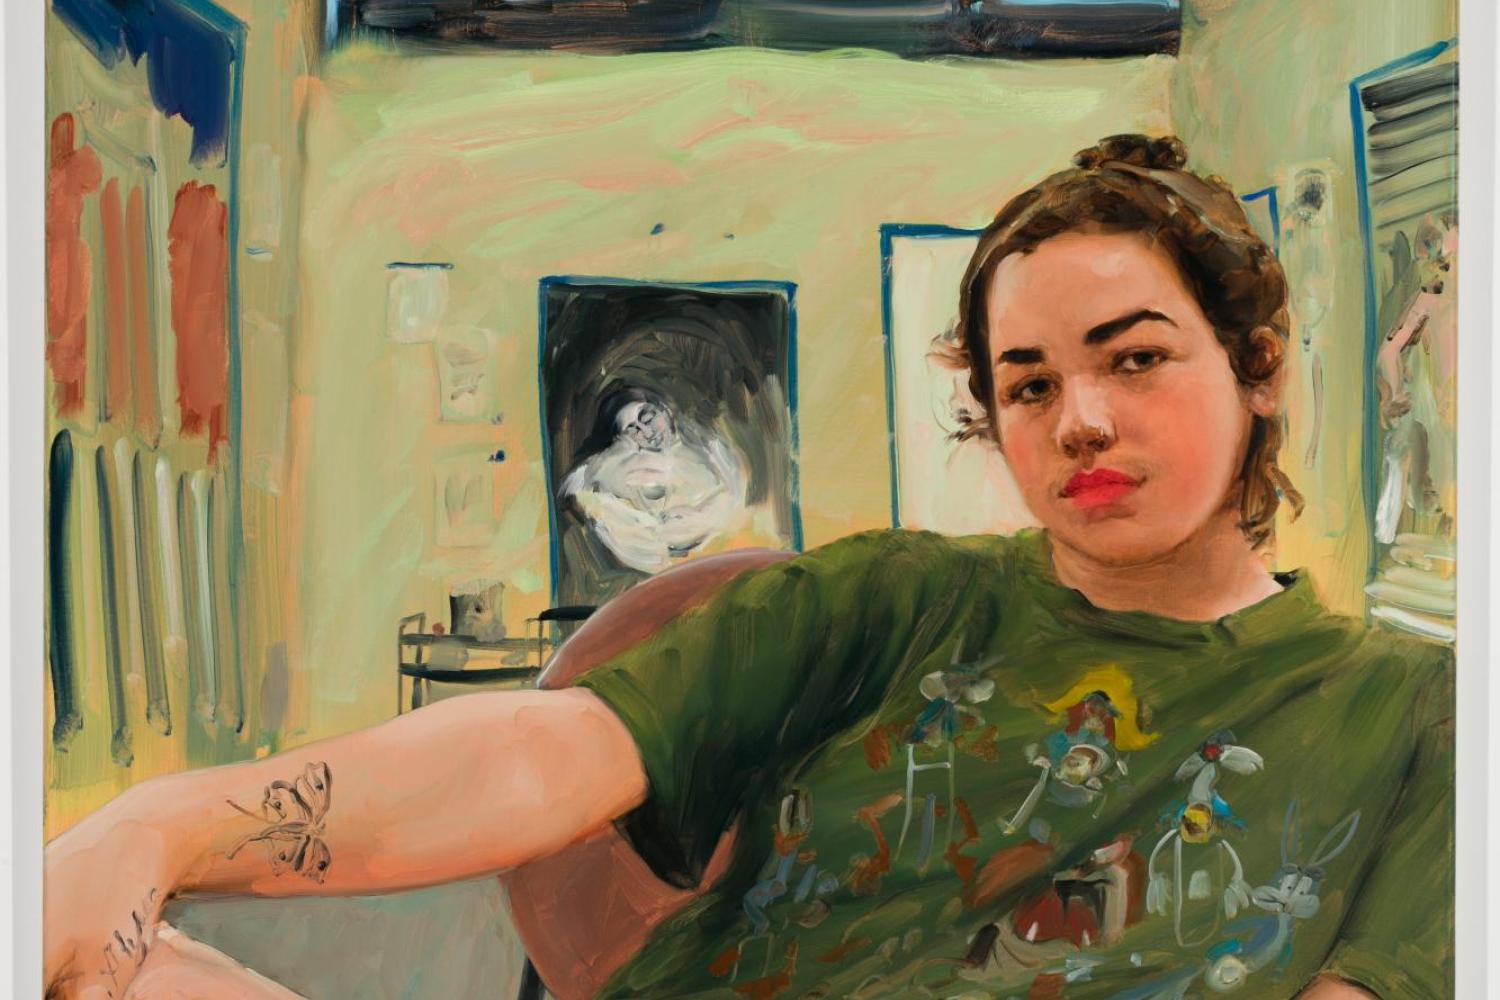 A painting of a person reclining with their leg up and bent. They have light skin and brown hair pulled into a messy bun. They are wearing a dark green graphic T-shirt and black shorts. They have many black tattoos on their arms and legs and are seated in a greenish room with paintings hanging from the walls, their studio.